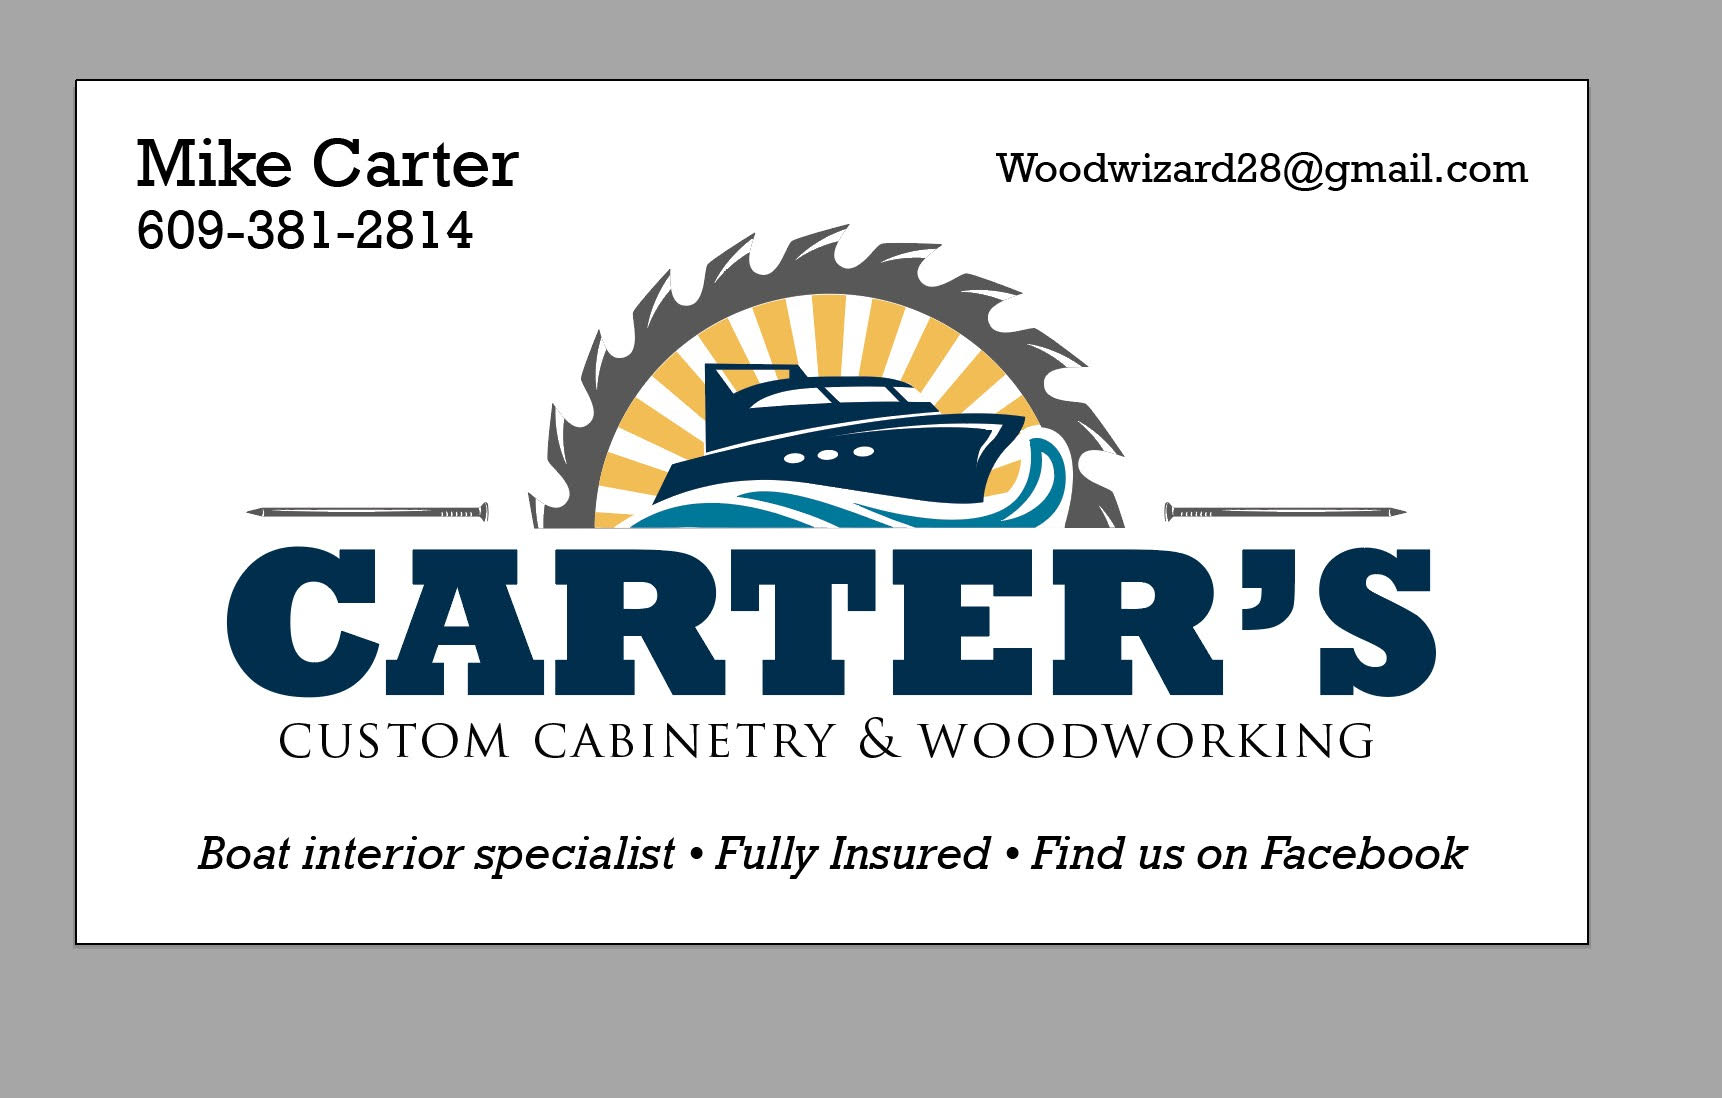 Mike Carter Woodworking
        (Silverton Specialist)